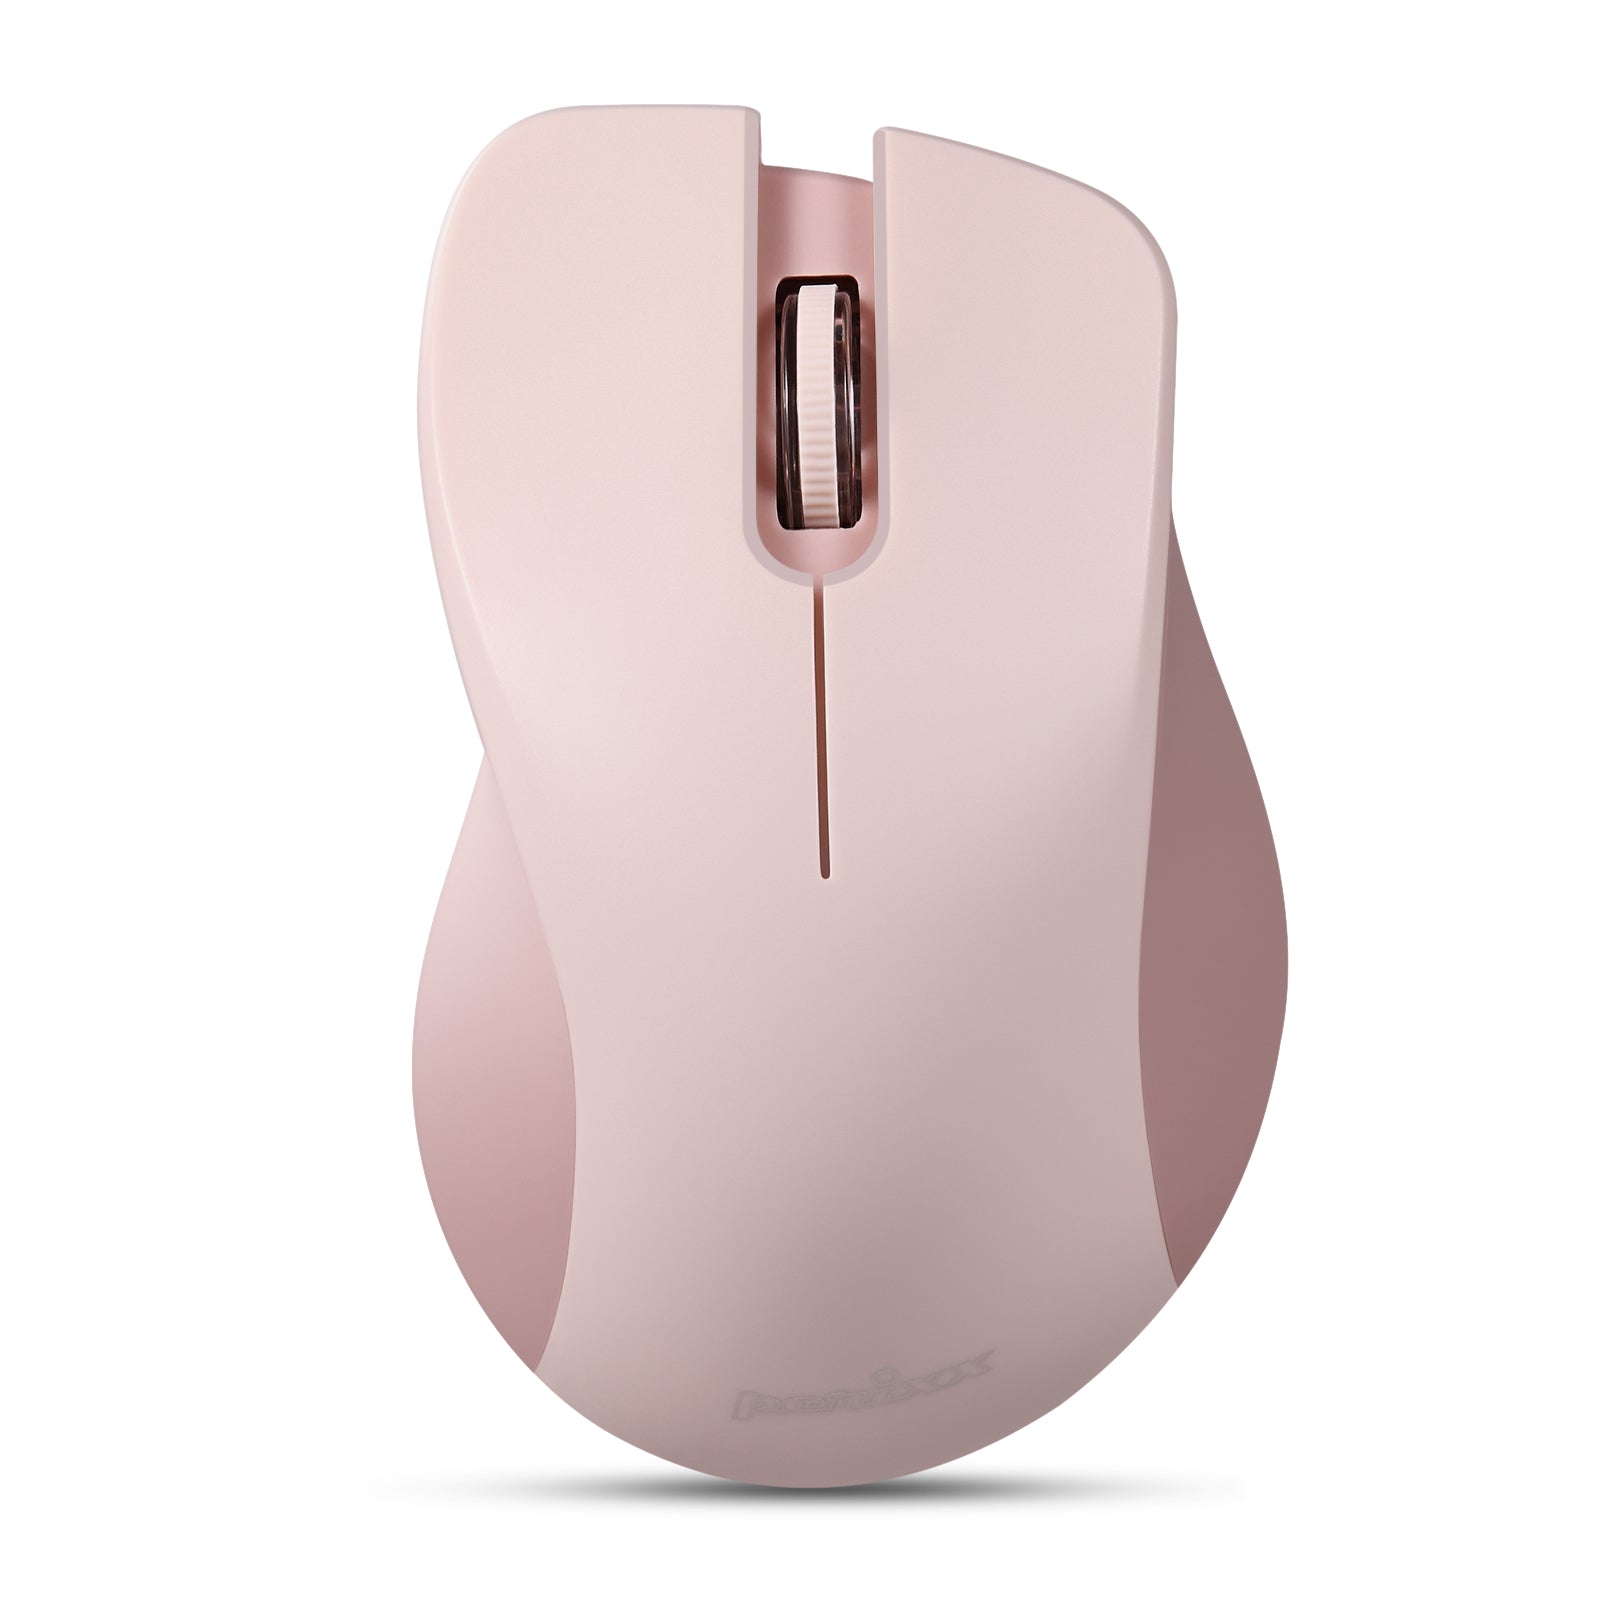 PERIMICE-621 Wireless Mouse with Silent Click and Ergo Design - Perixx Europe